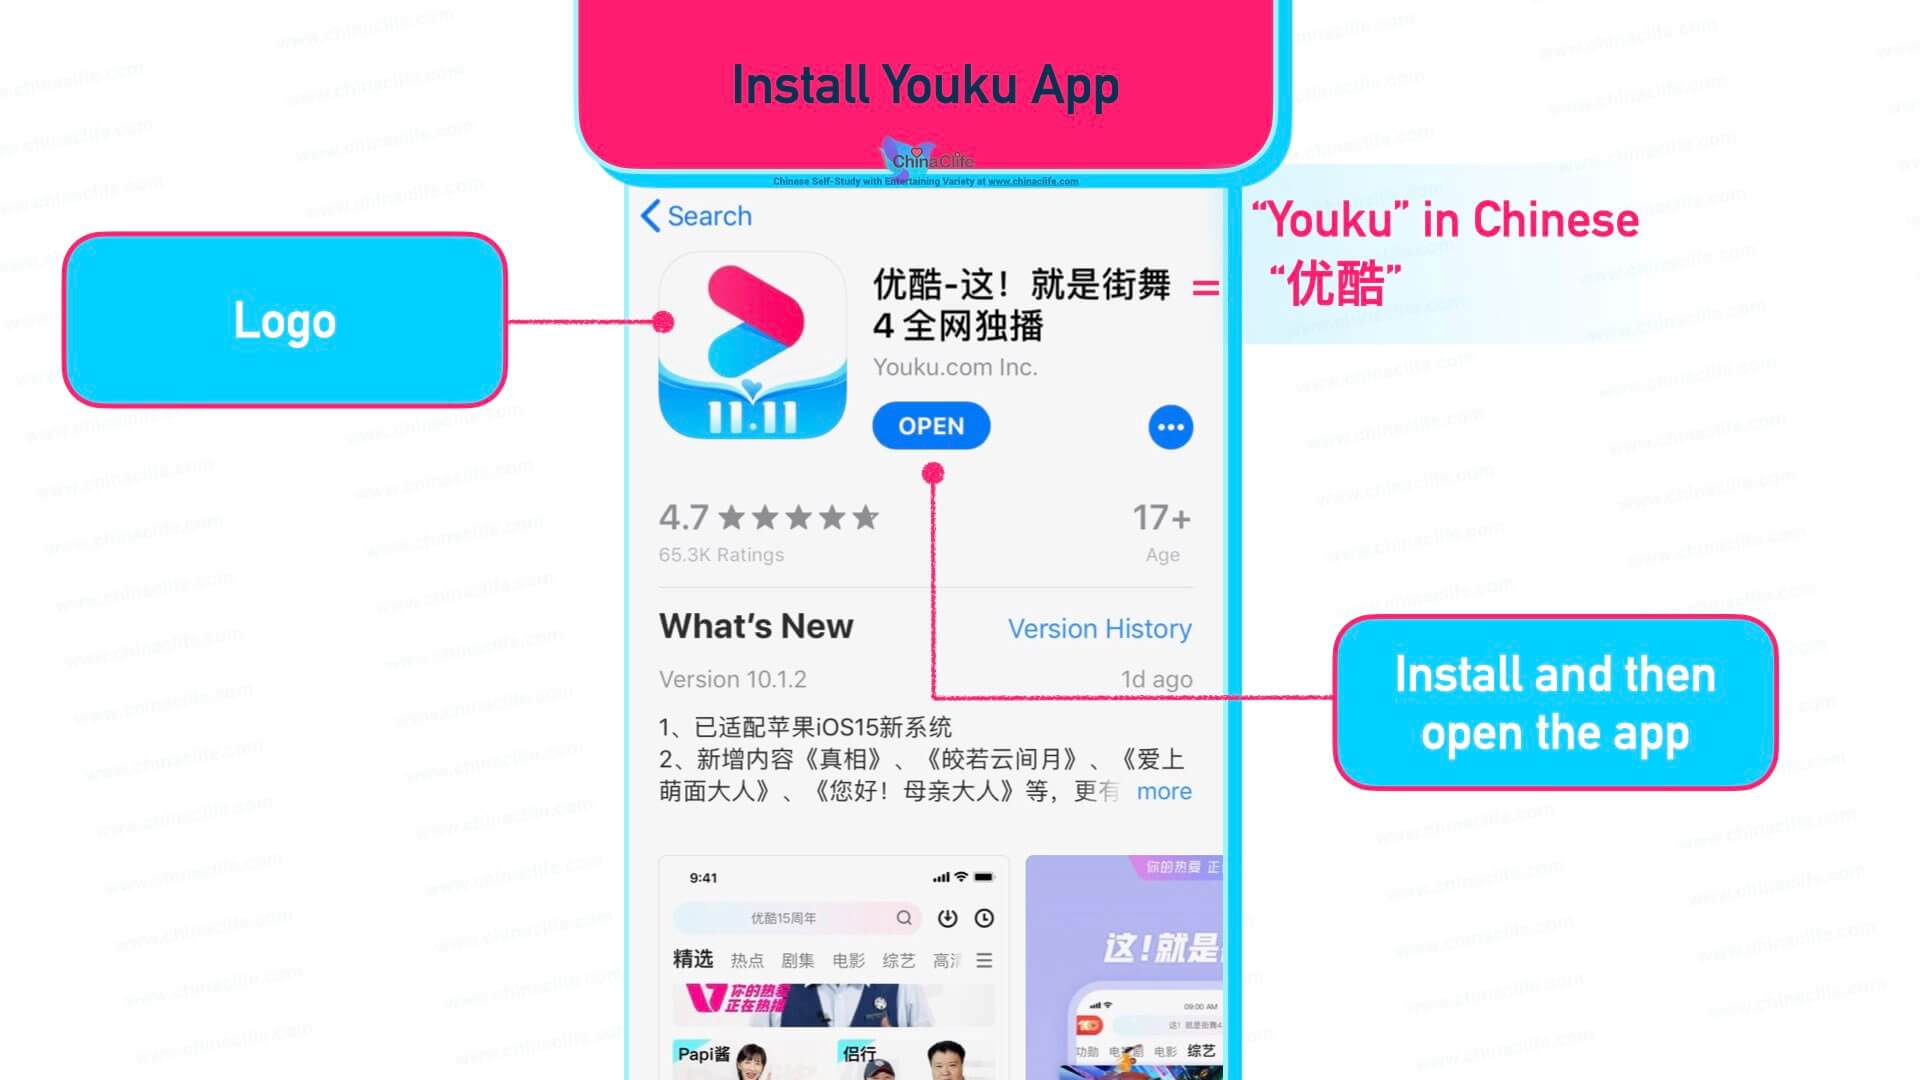 steps on how to install and register Youku account for inter fans via mobile